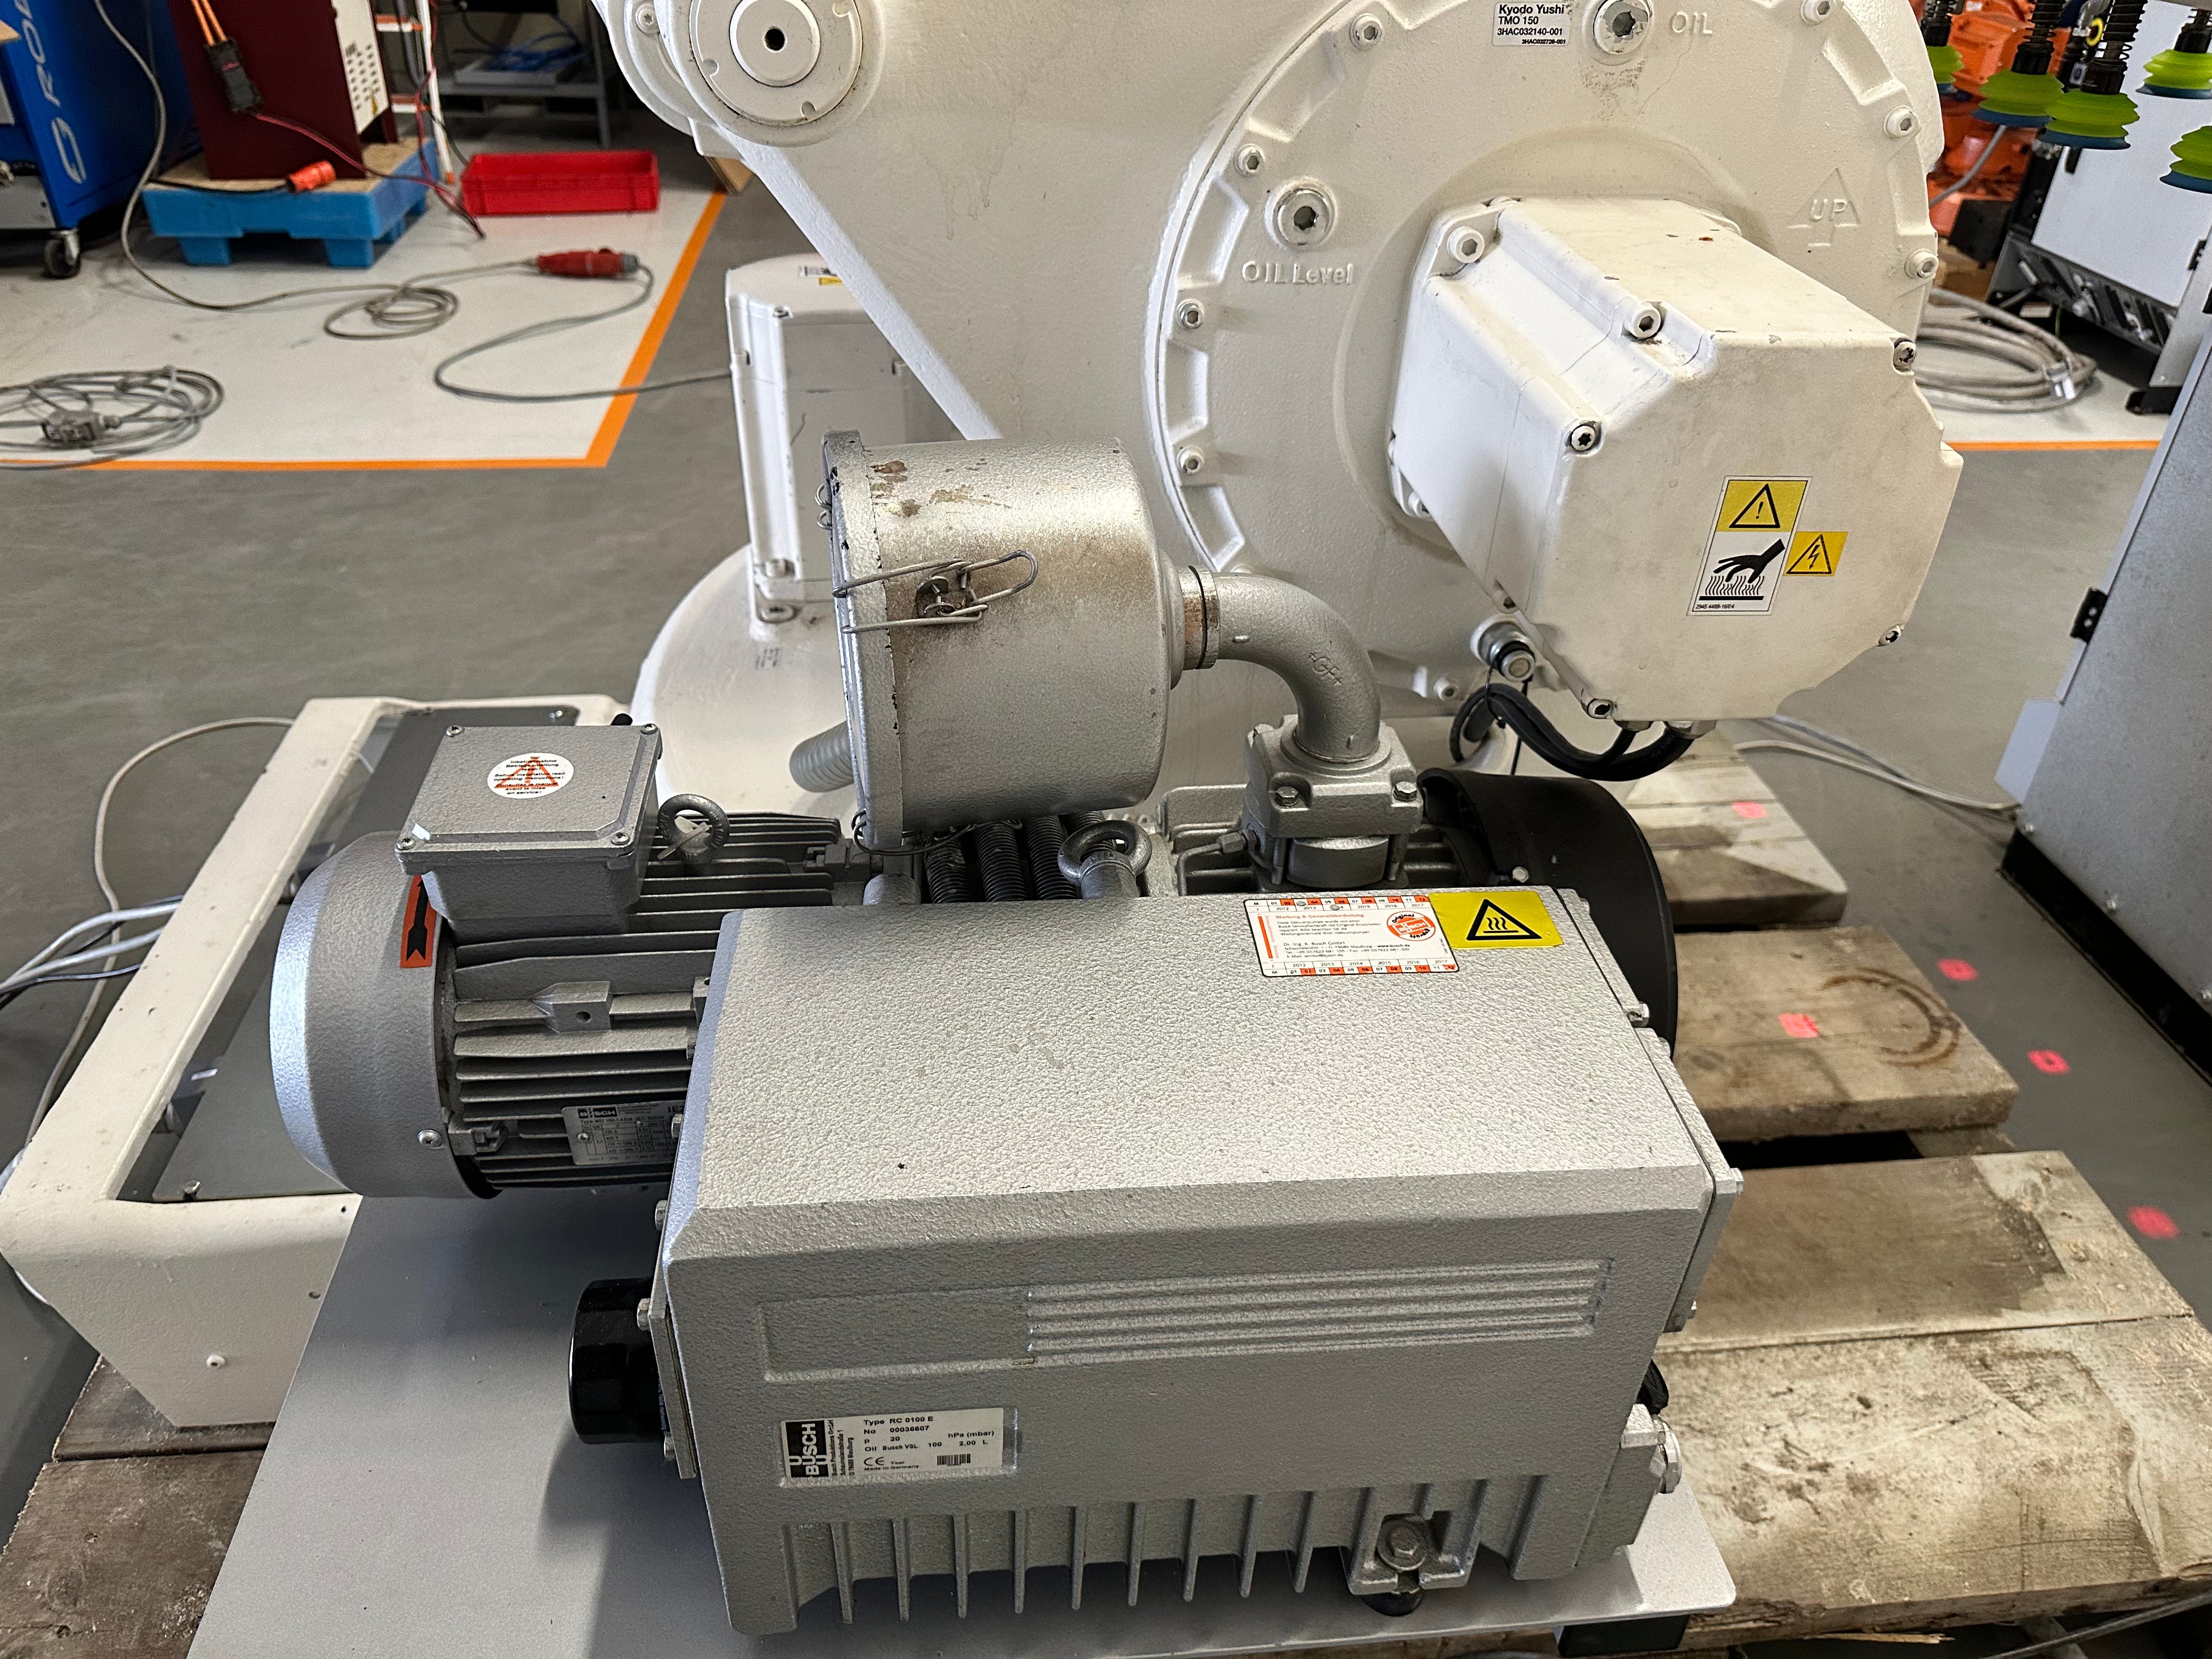 ABB IRB 660-180/3.15 palletizing robot with vacuum pump and gripper